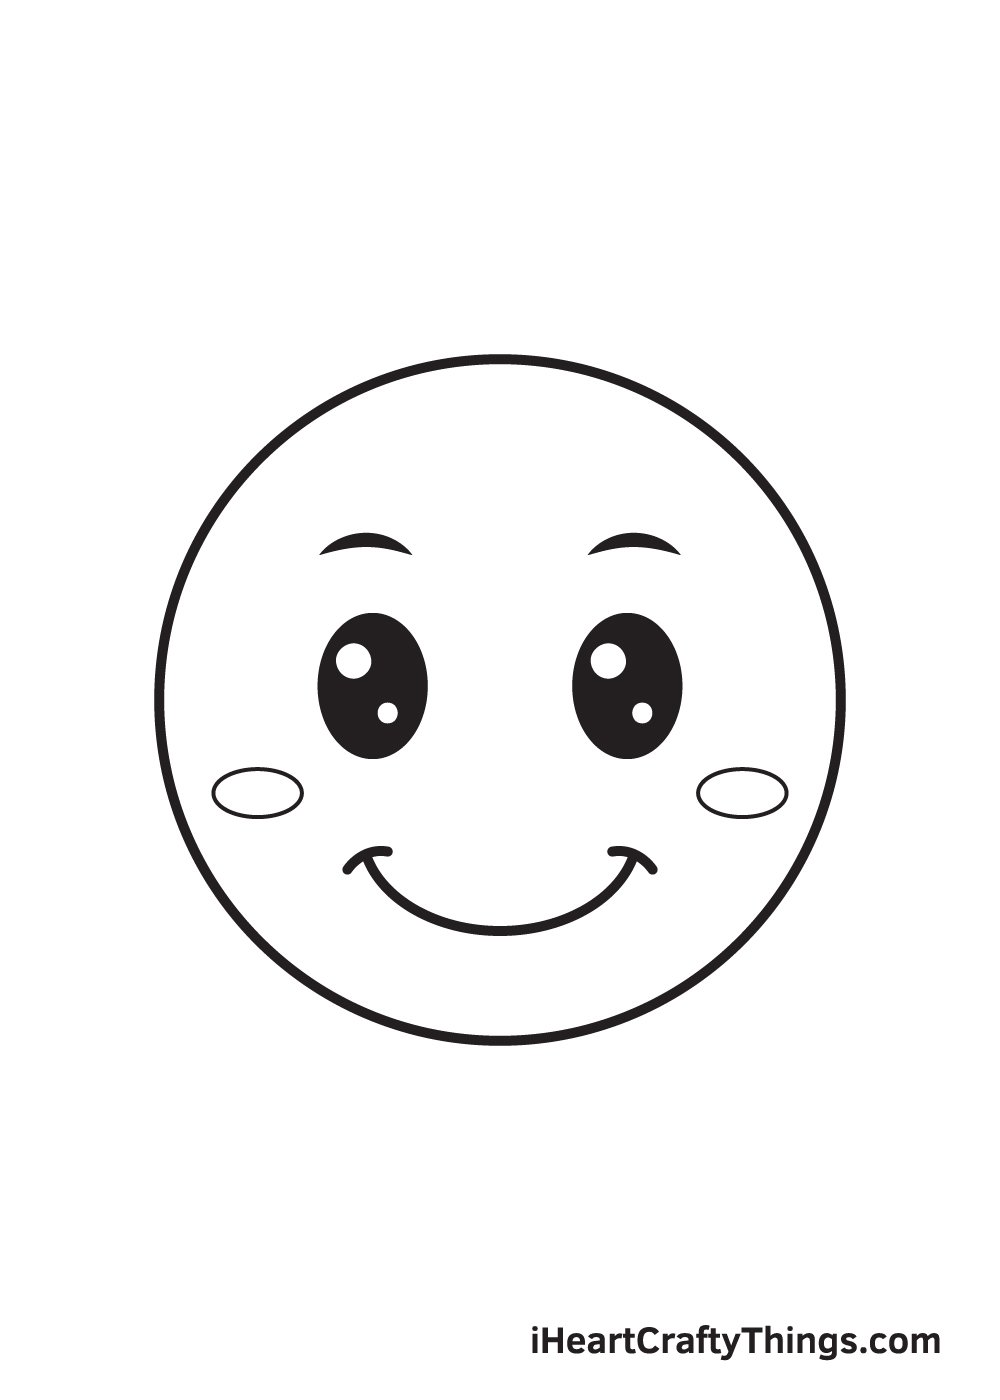 Smiley Face Drawing Stockfoto - Getty Images